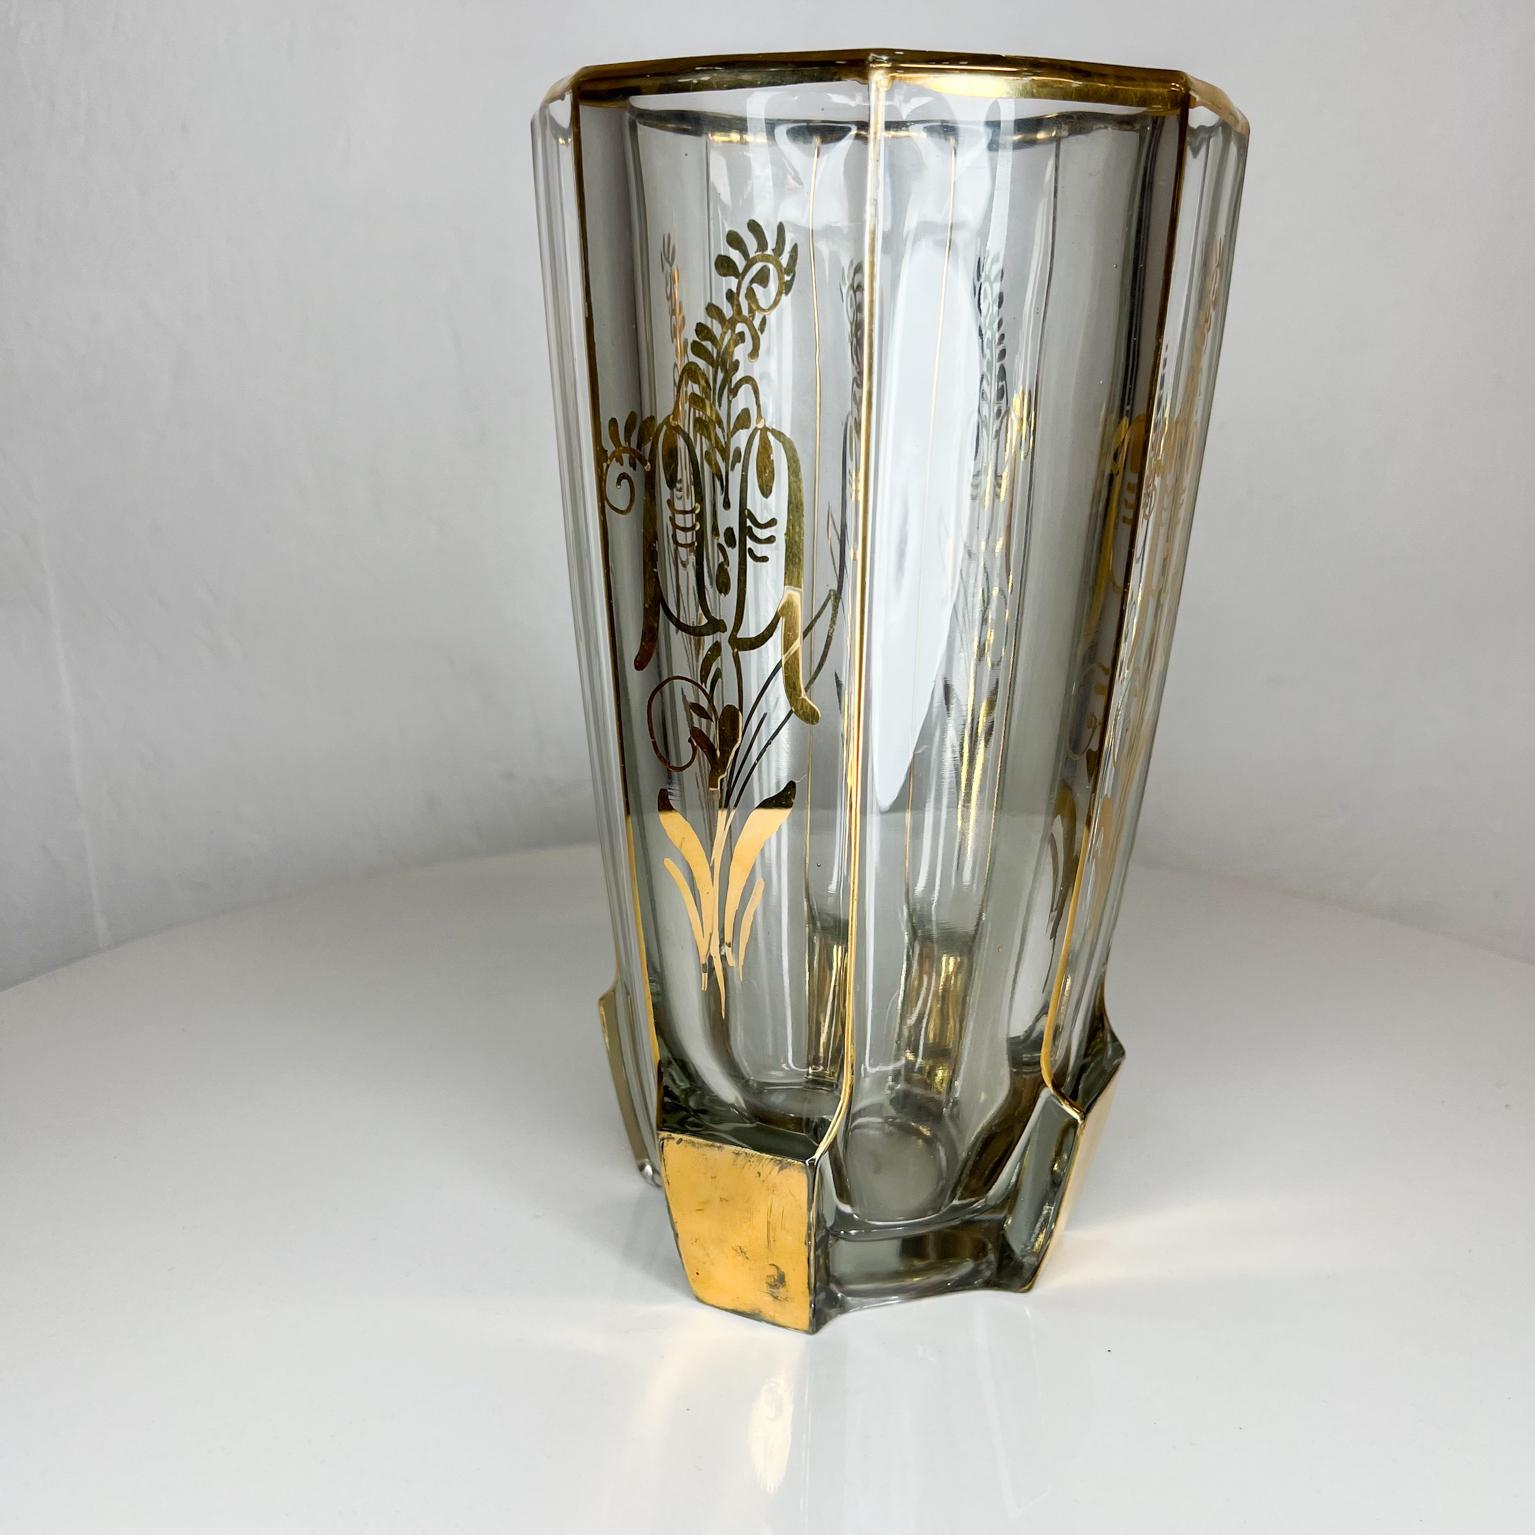 1960s Modern Hollywood Regency Stunning Glass Vase with Gold Painted Motif 1